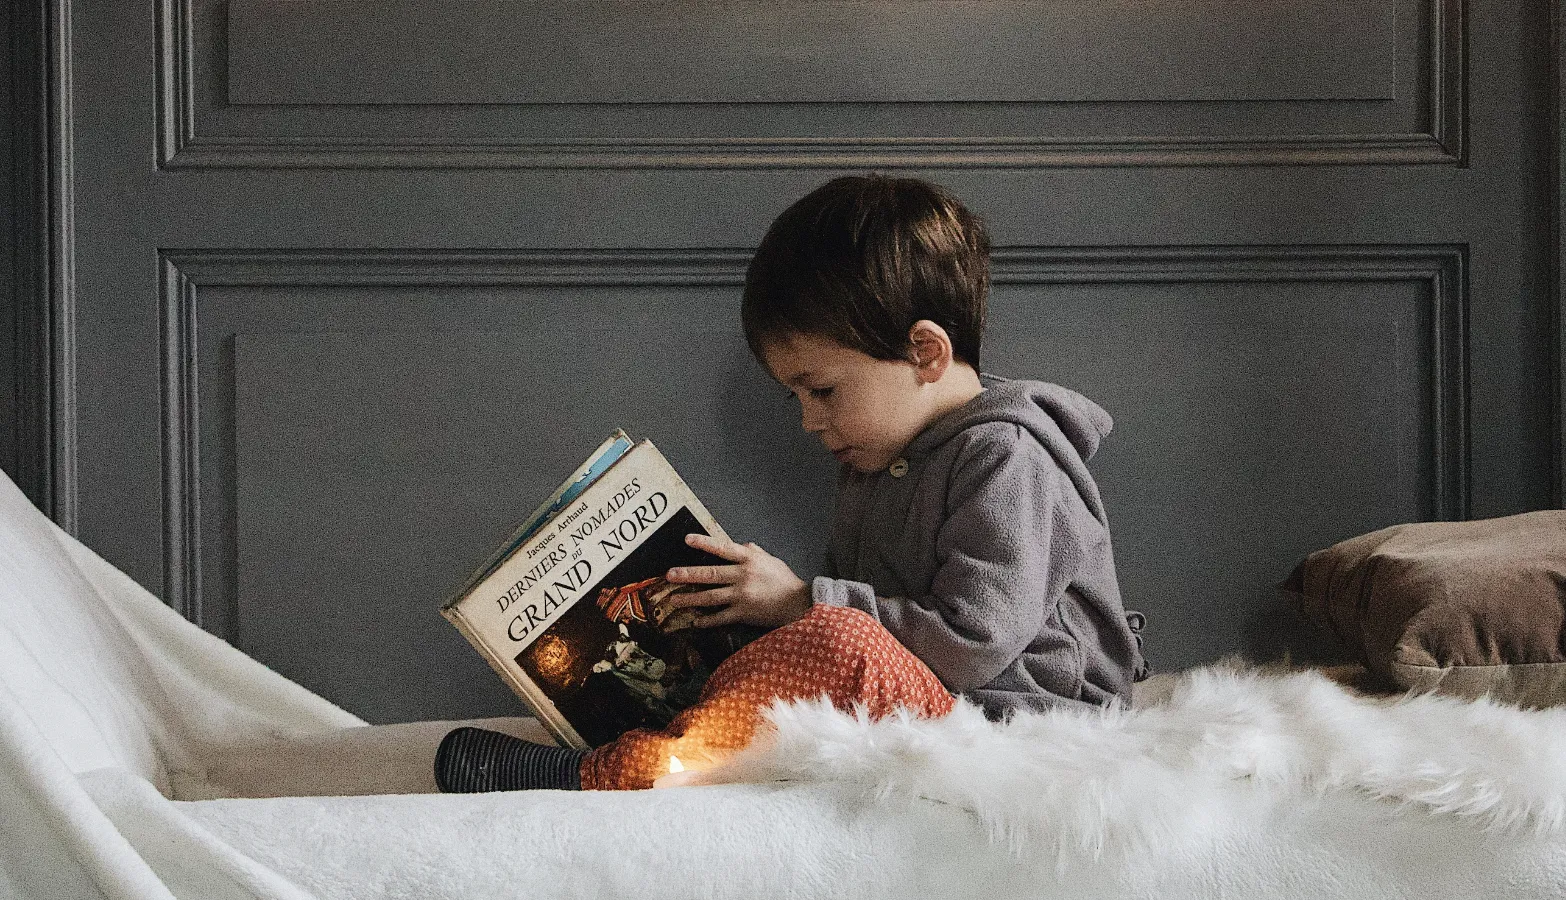 child reading a book on magic